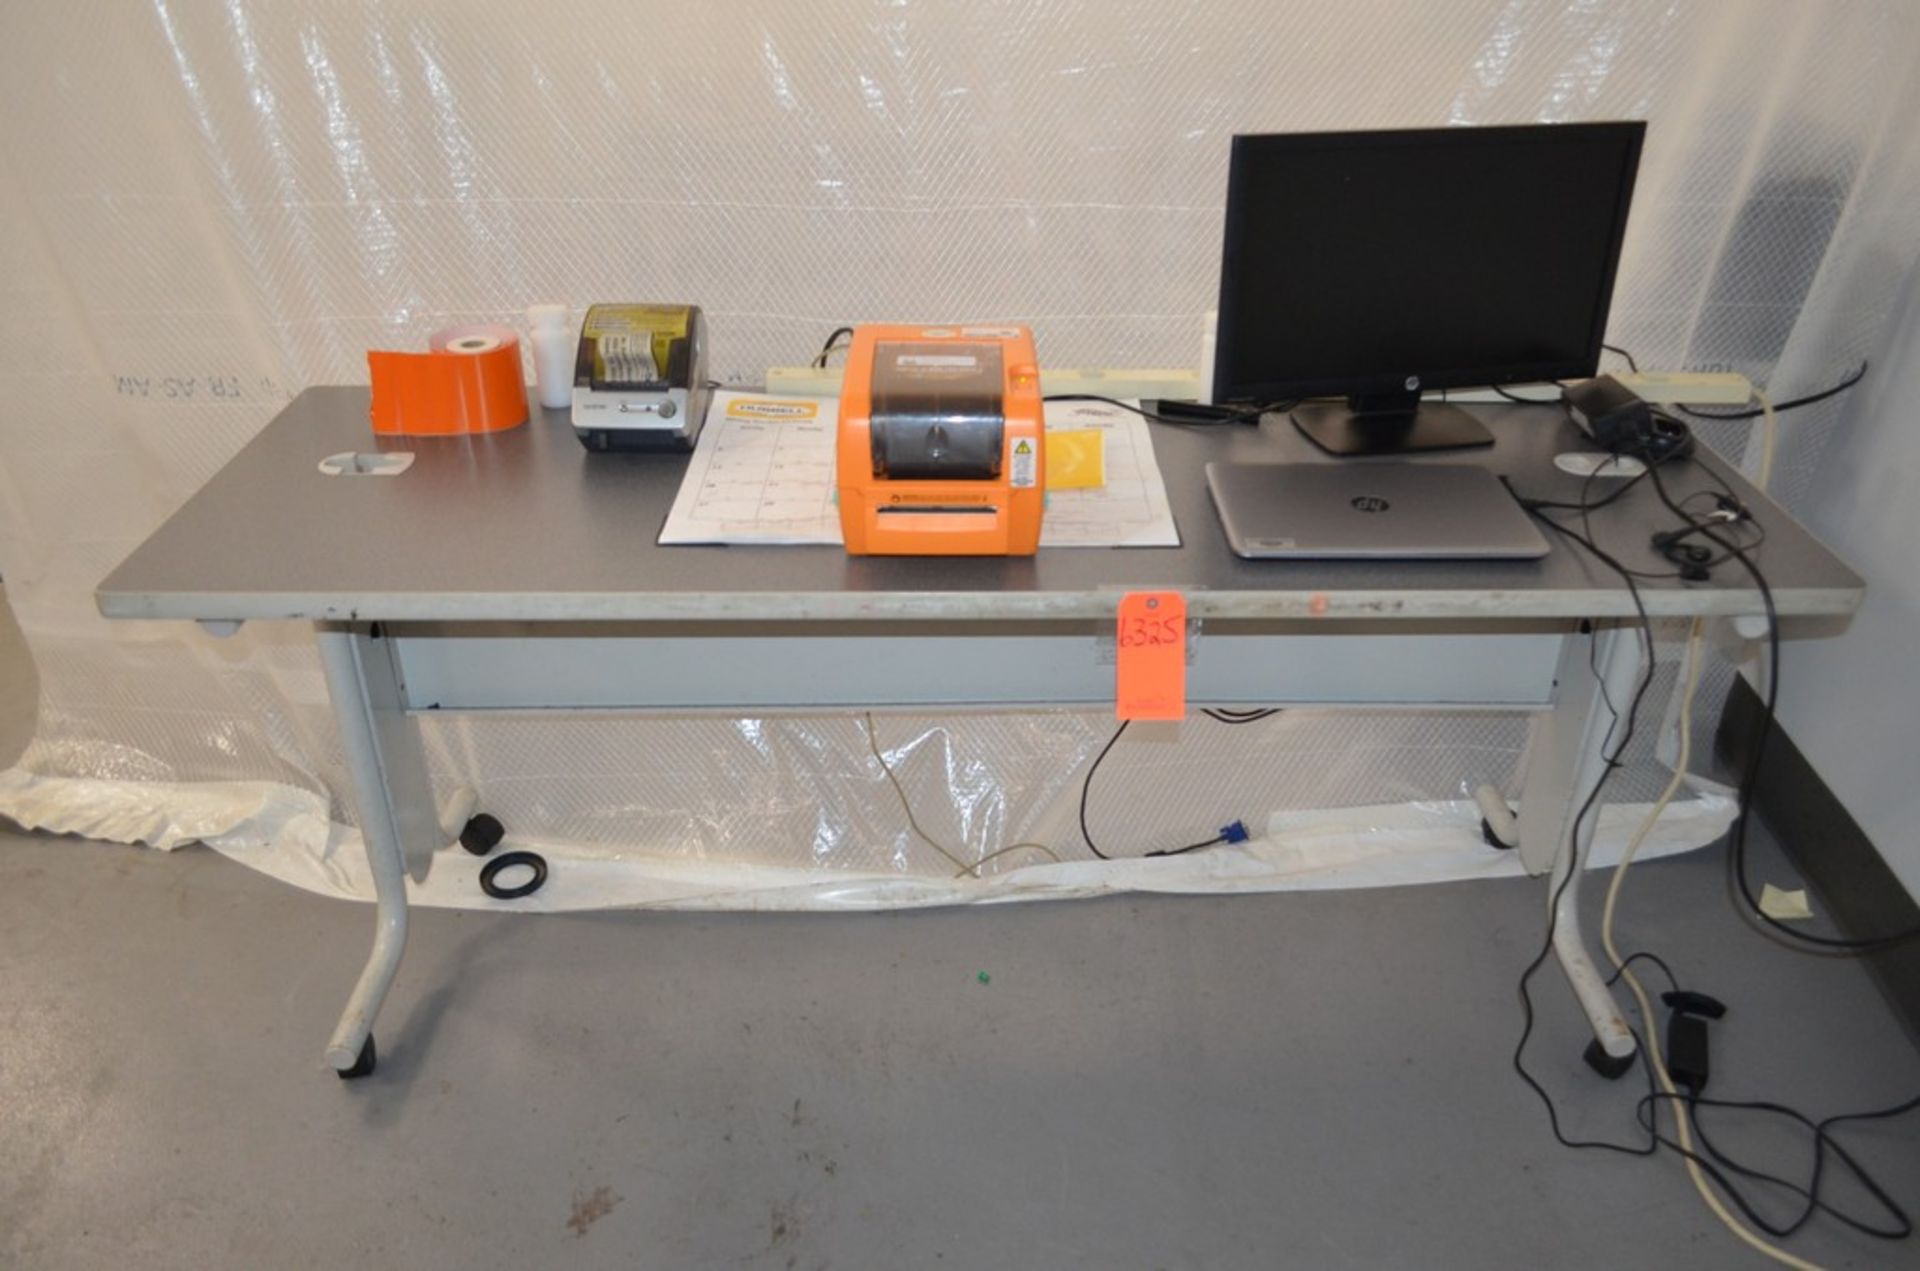 Lot - Table with Dura Label Pro and Brother P-Touch QL-500 Label Printer (No Laptop or Monitor);